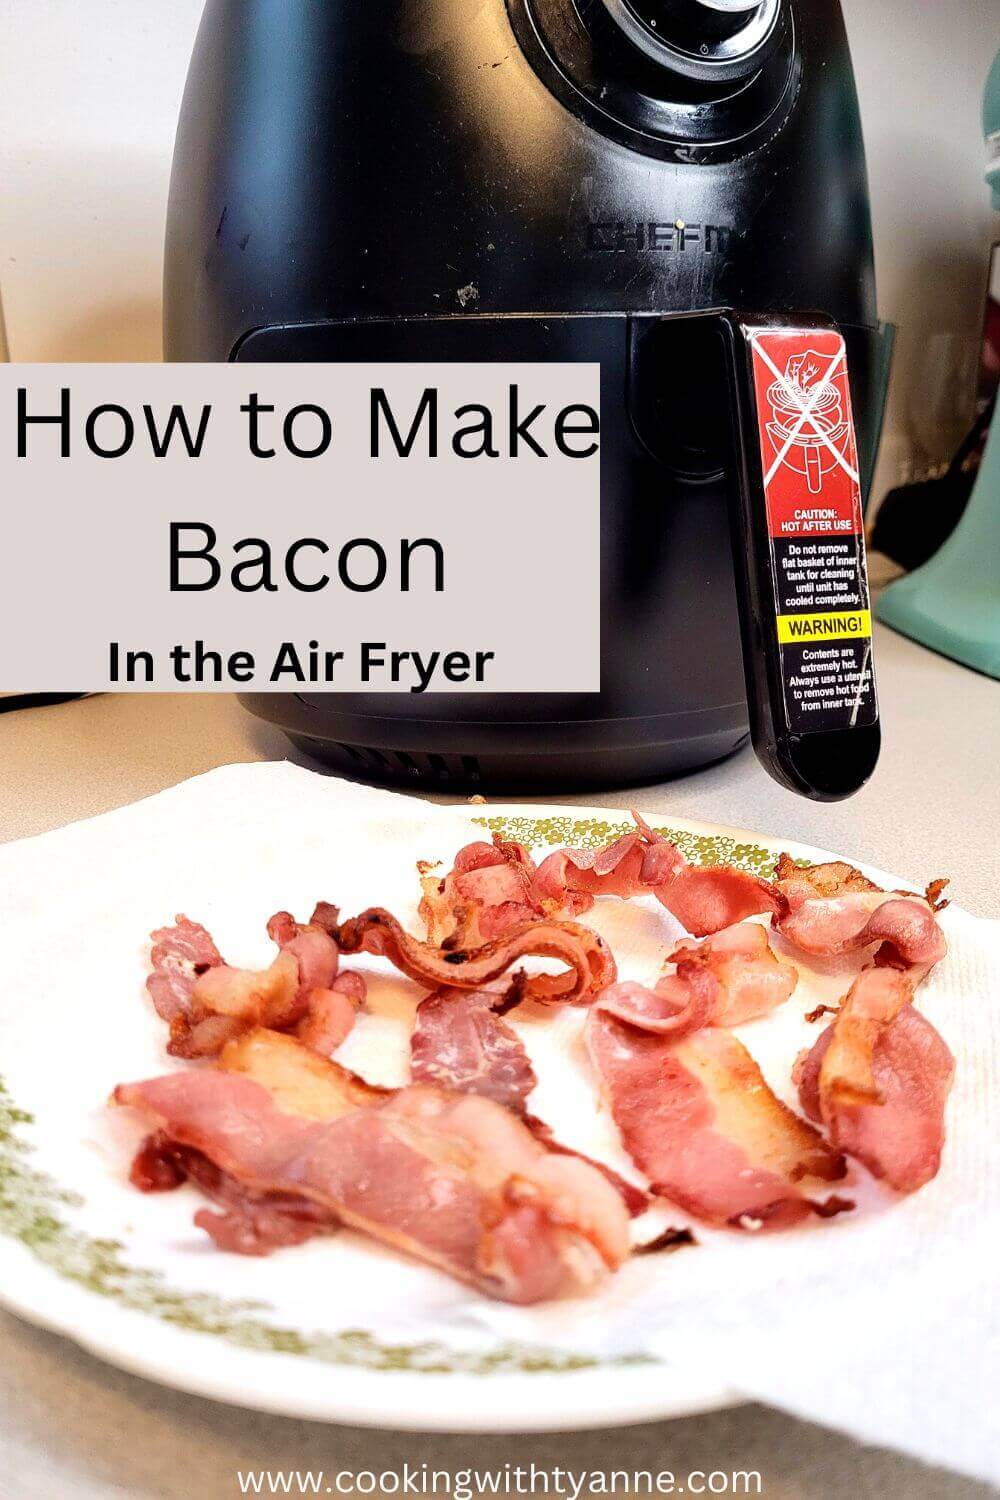 How to make bacon in air fryer pinterest image.